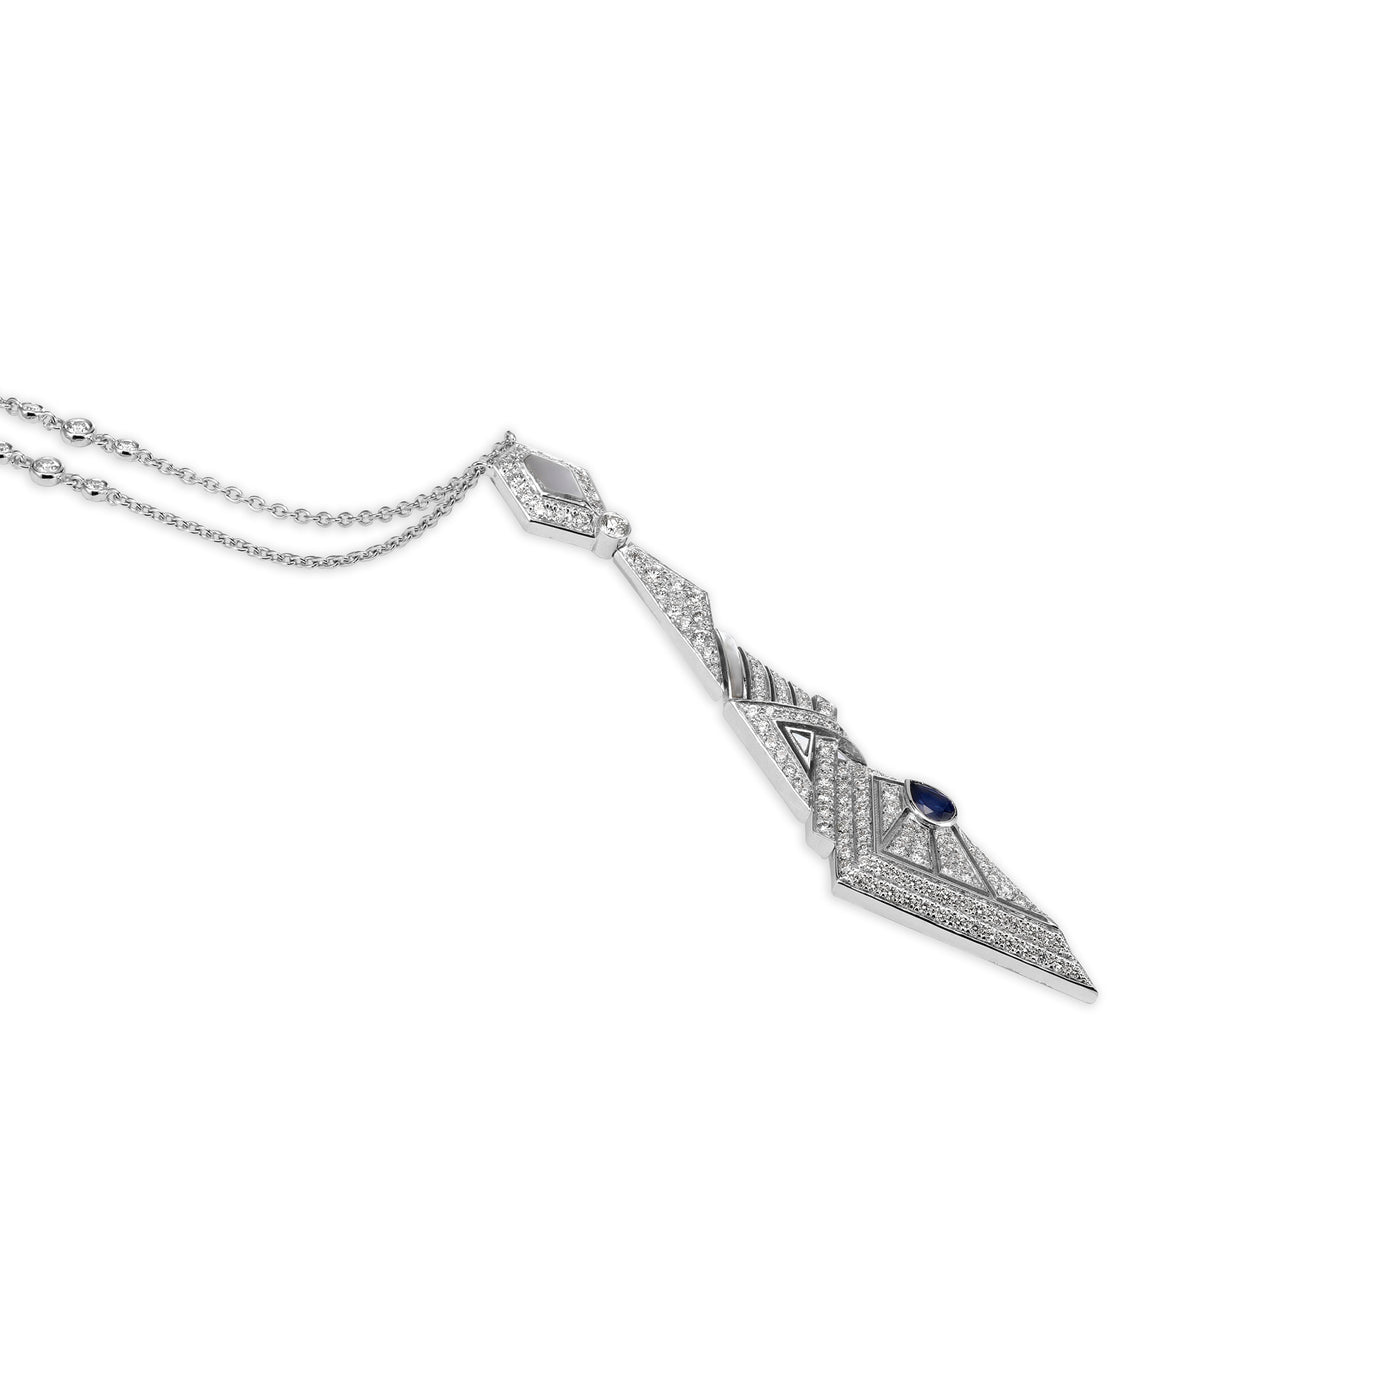 Soit Belle White Gold Pointed Diamond and Natural Sapphire Pendant: Timeless Beauty